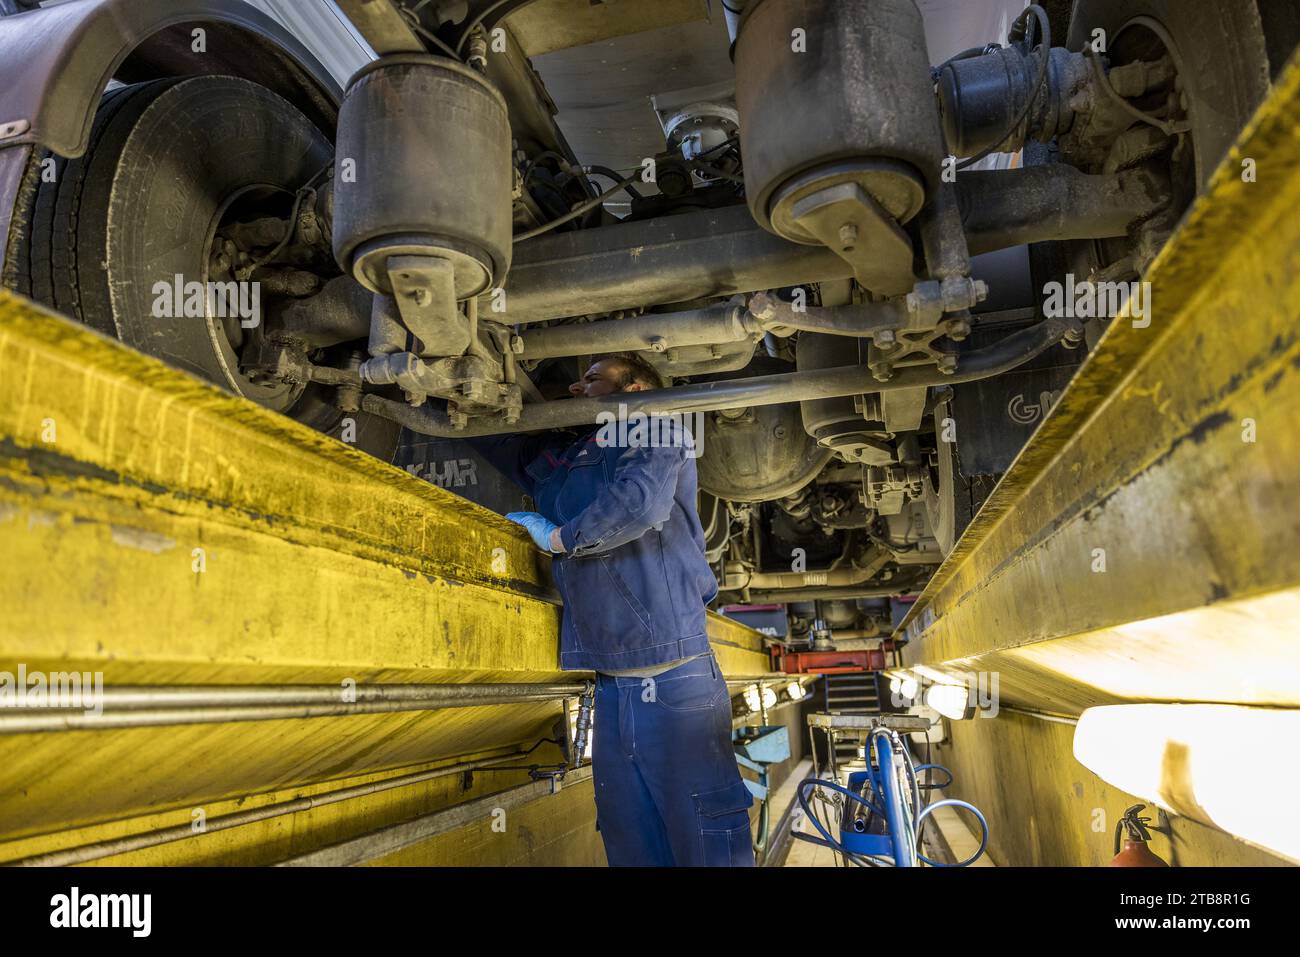 Garage, repair shop for heavy goods vehicles: mechanic in the inspection pit working on the engine of a Scania truck Stock Photo